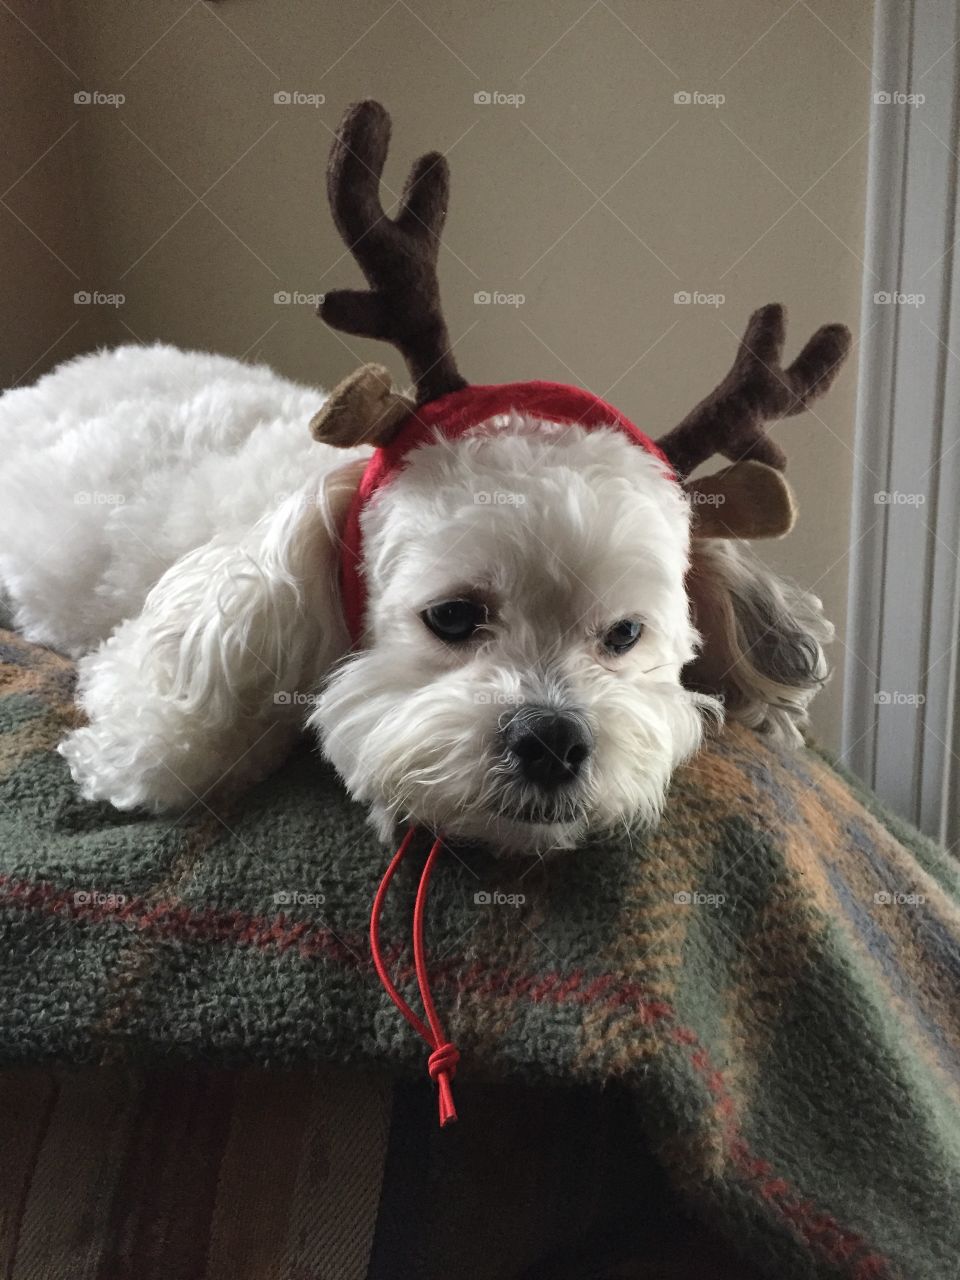 The reindeer that couldn't 